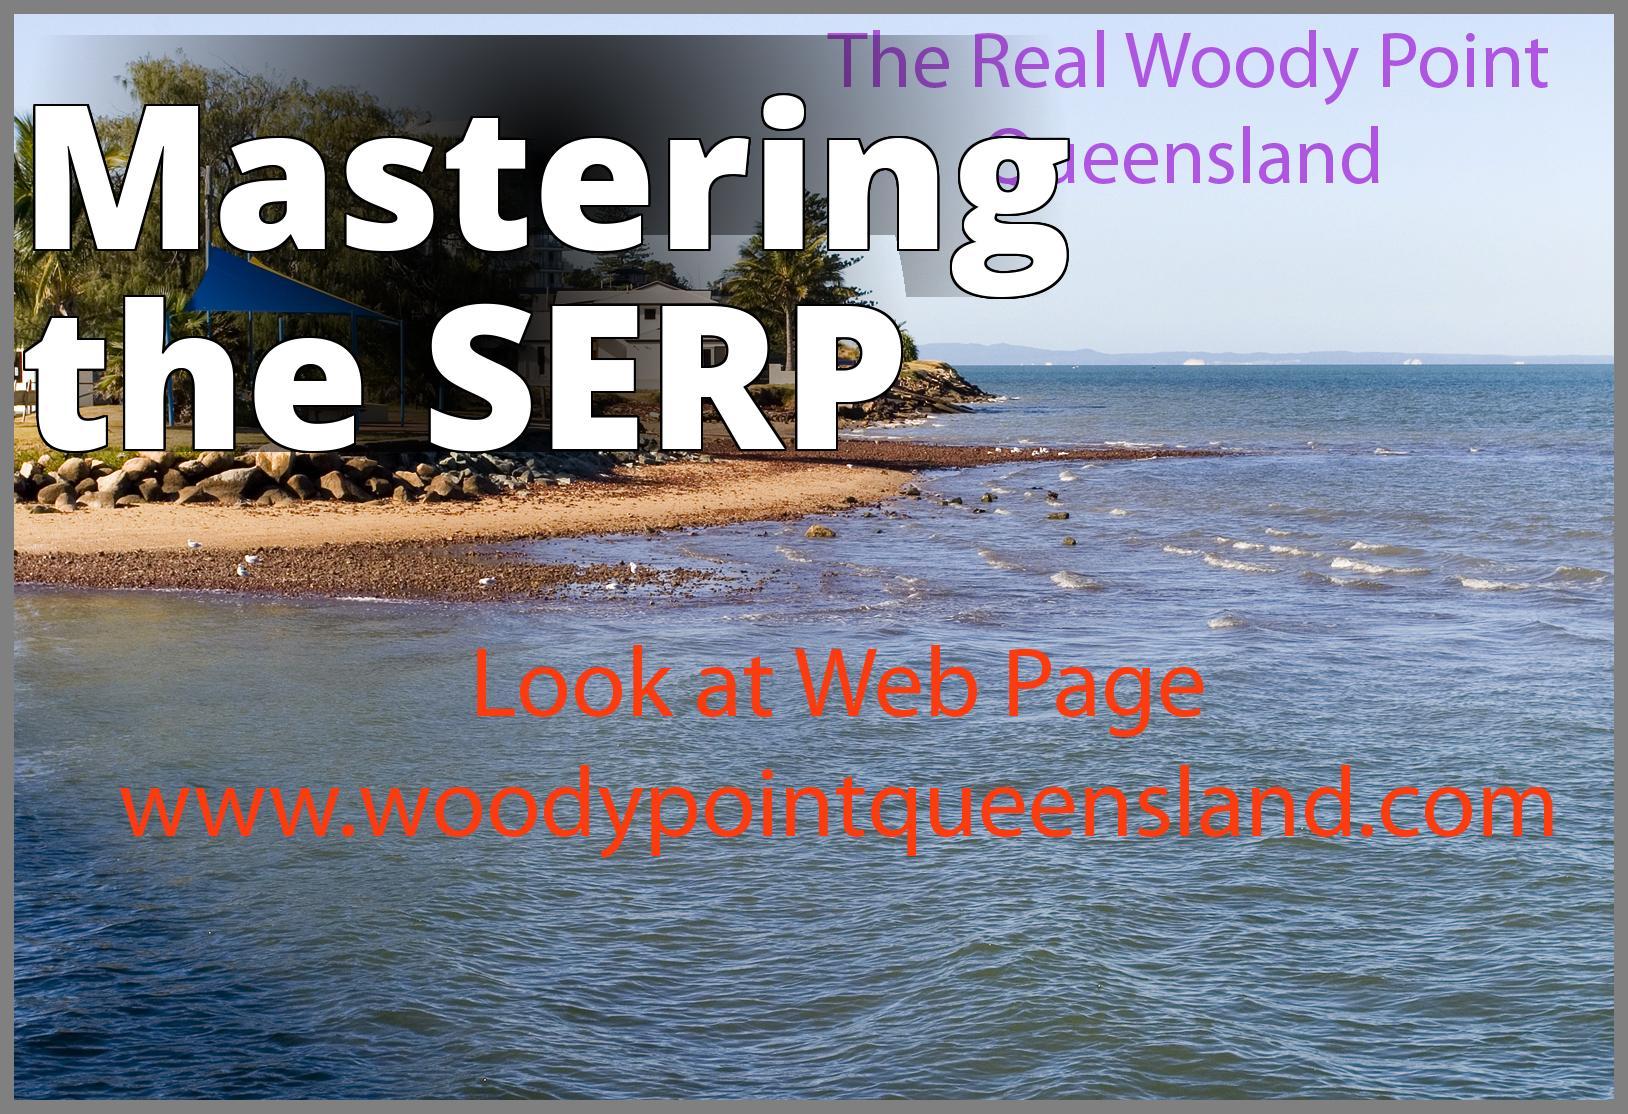 Woody Point's Point Web Page (2826140363) - the real way point queensland